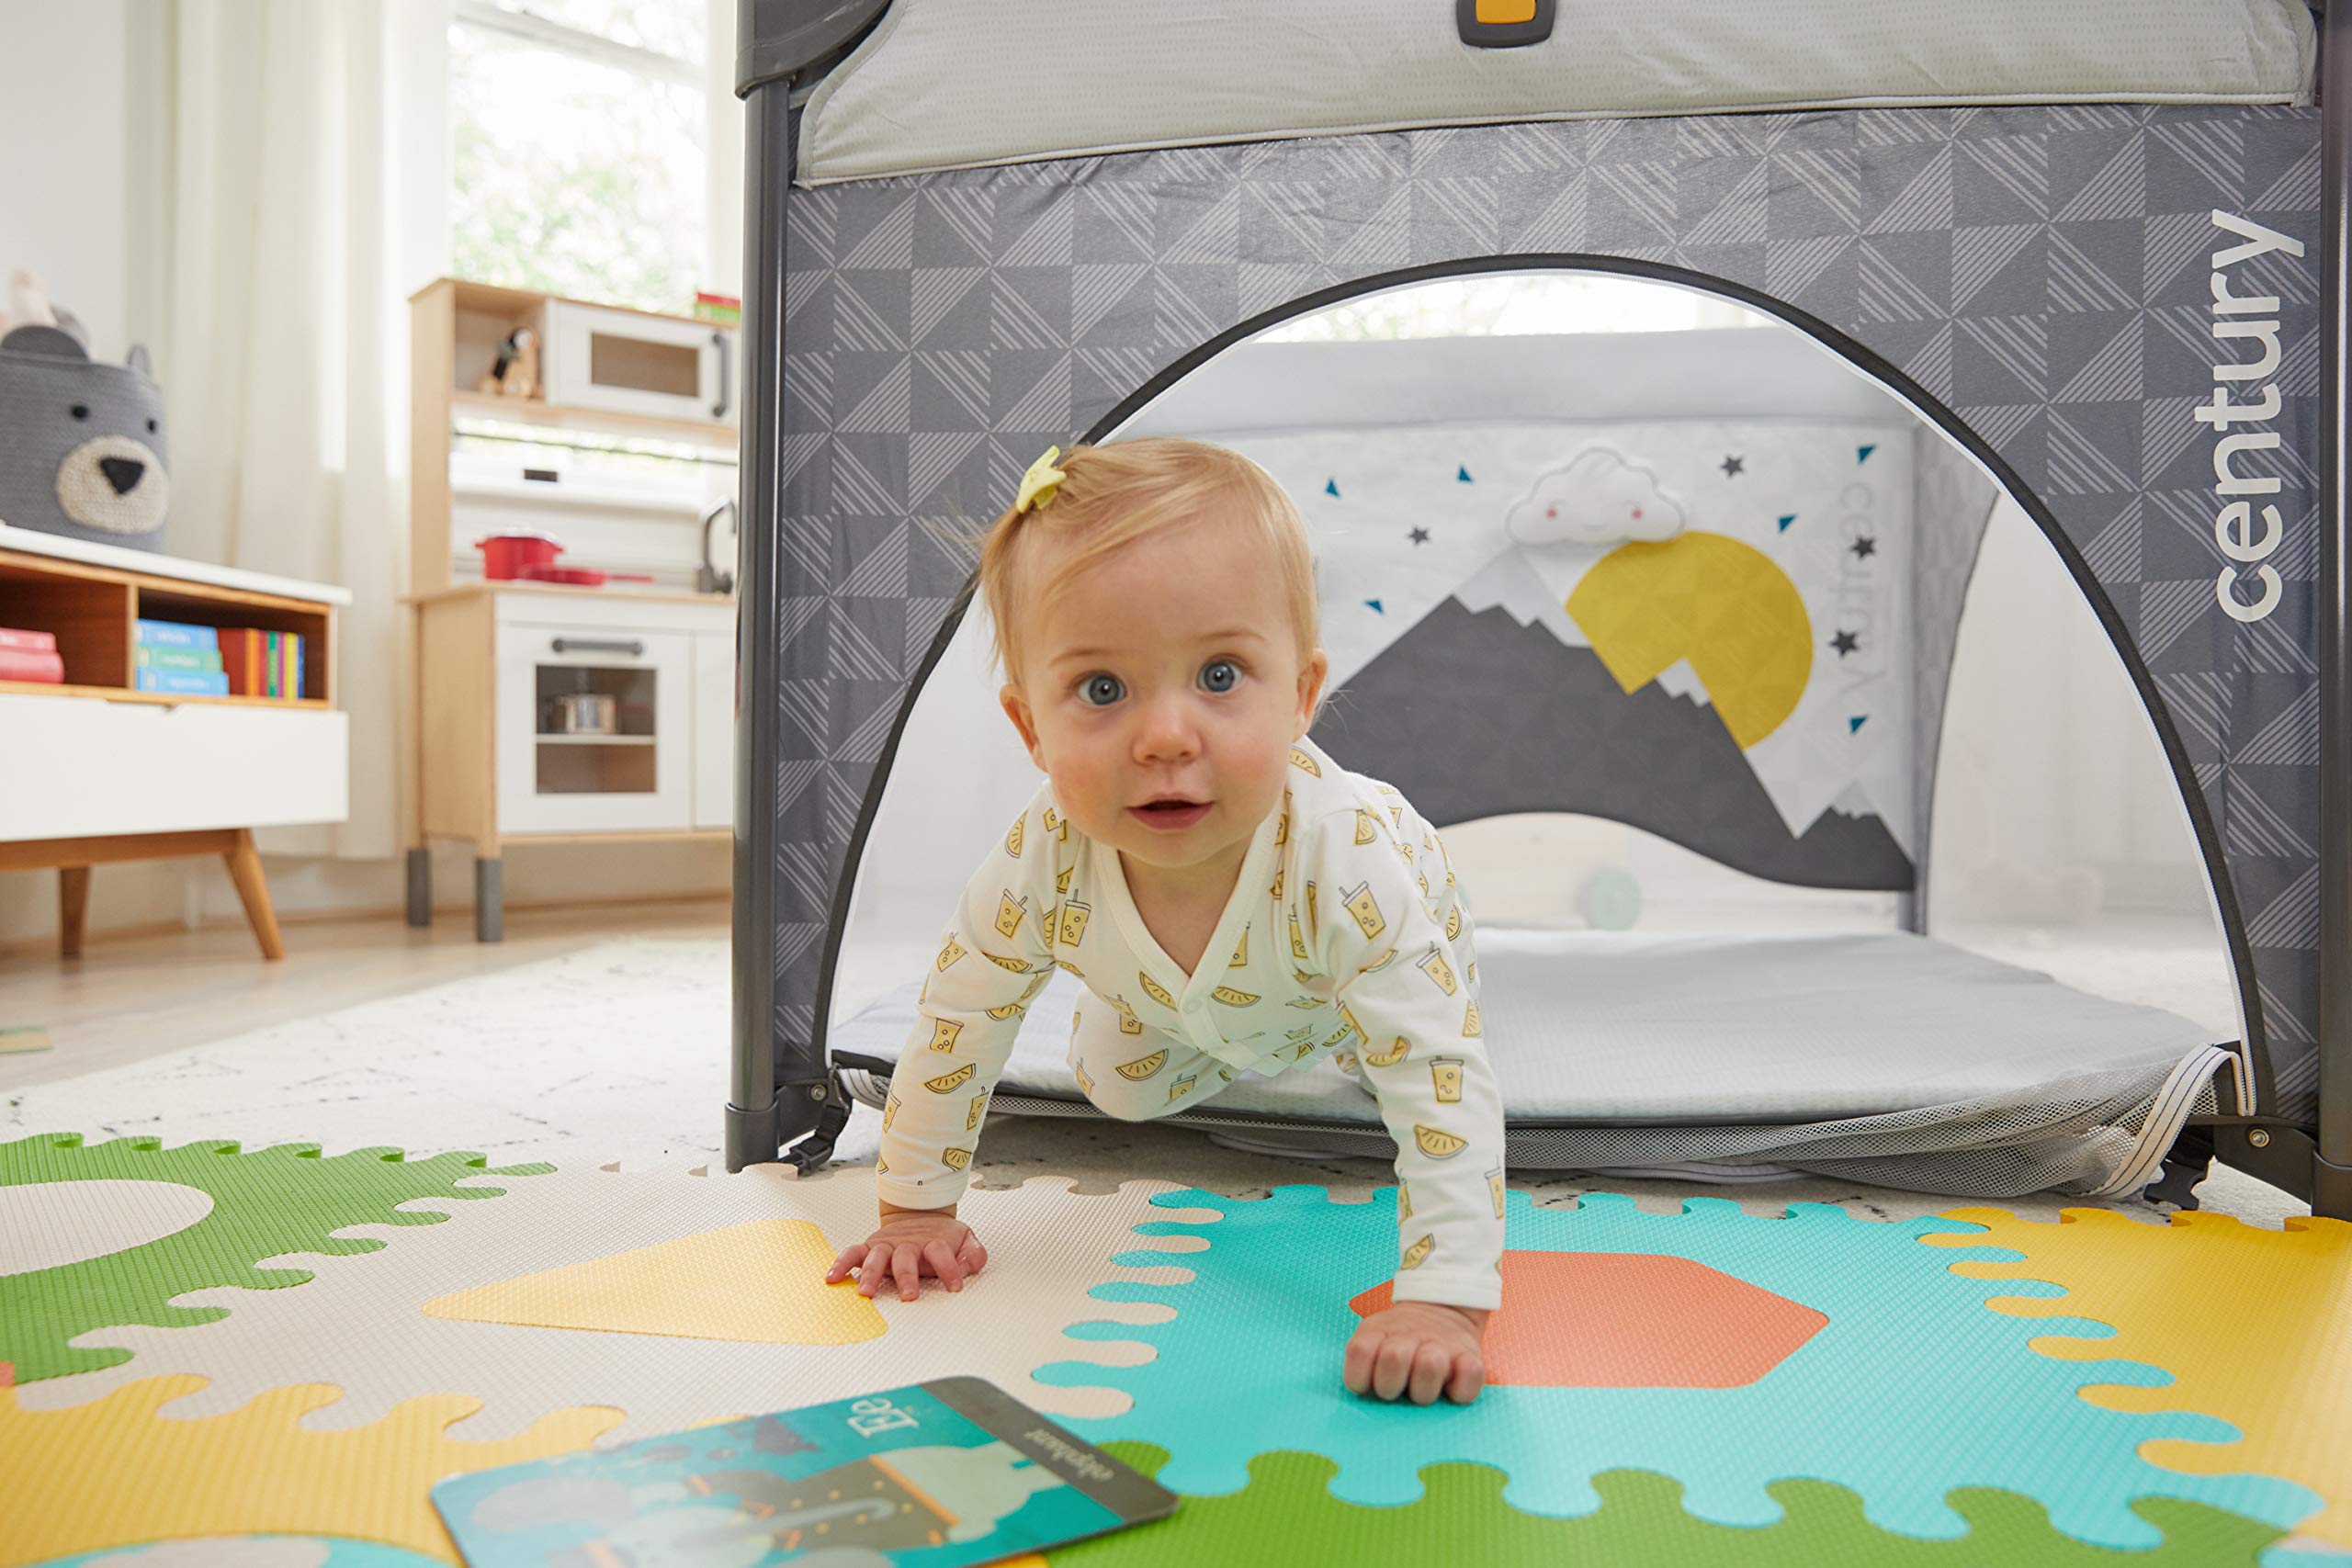 Century Play On 2-in-1 Playard and Activity Center, Playpen Includes Soft Toys and Zippered Door, Metro